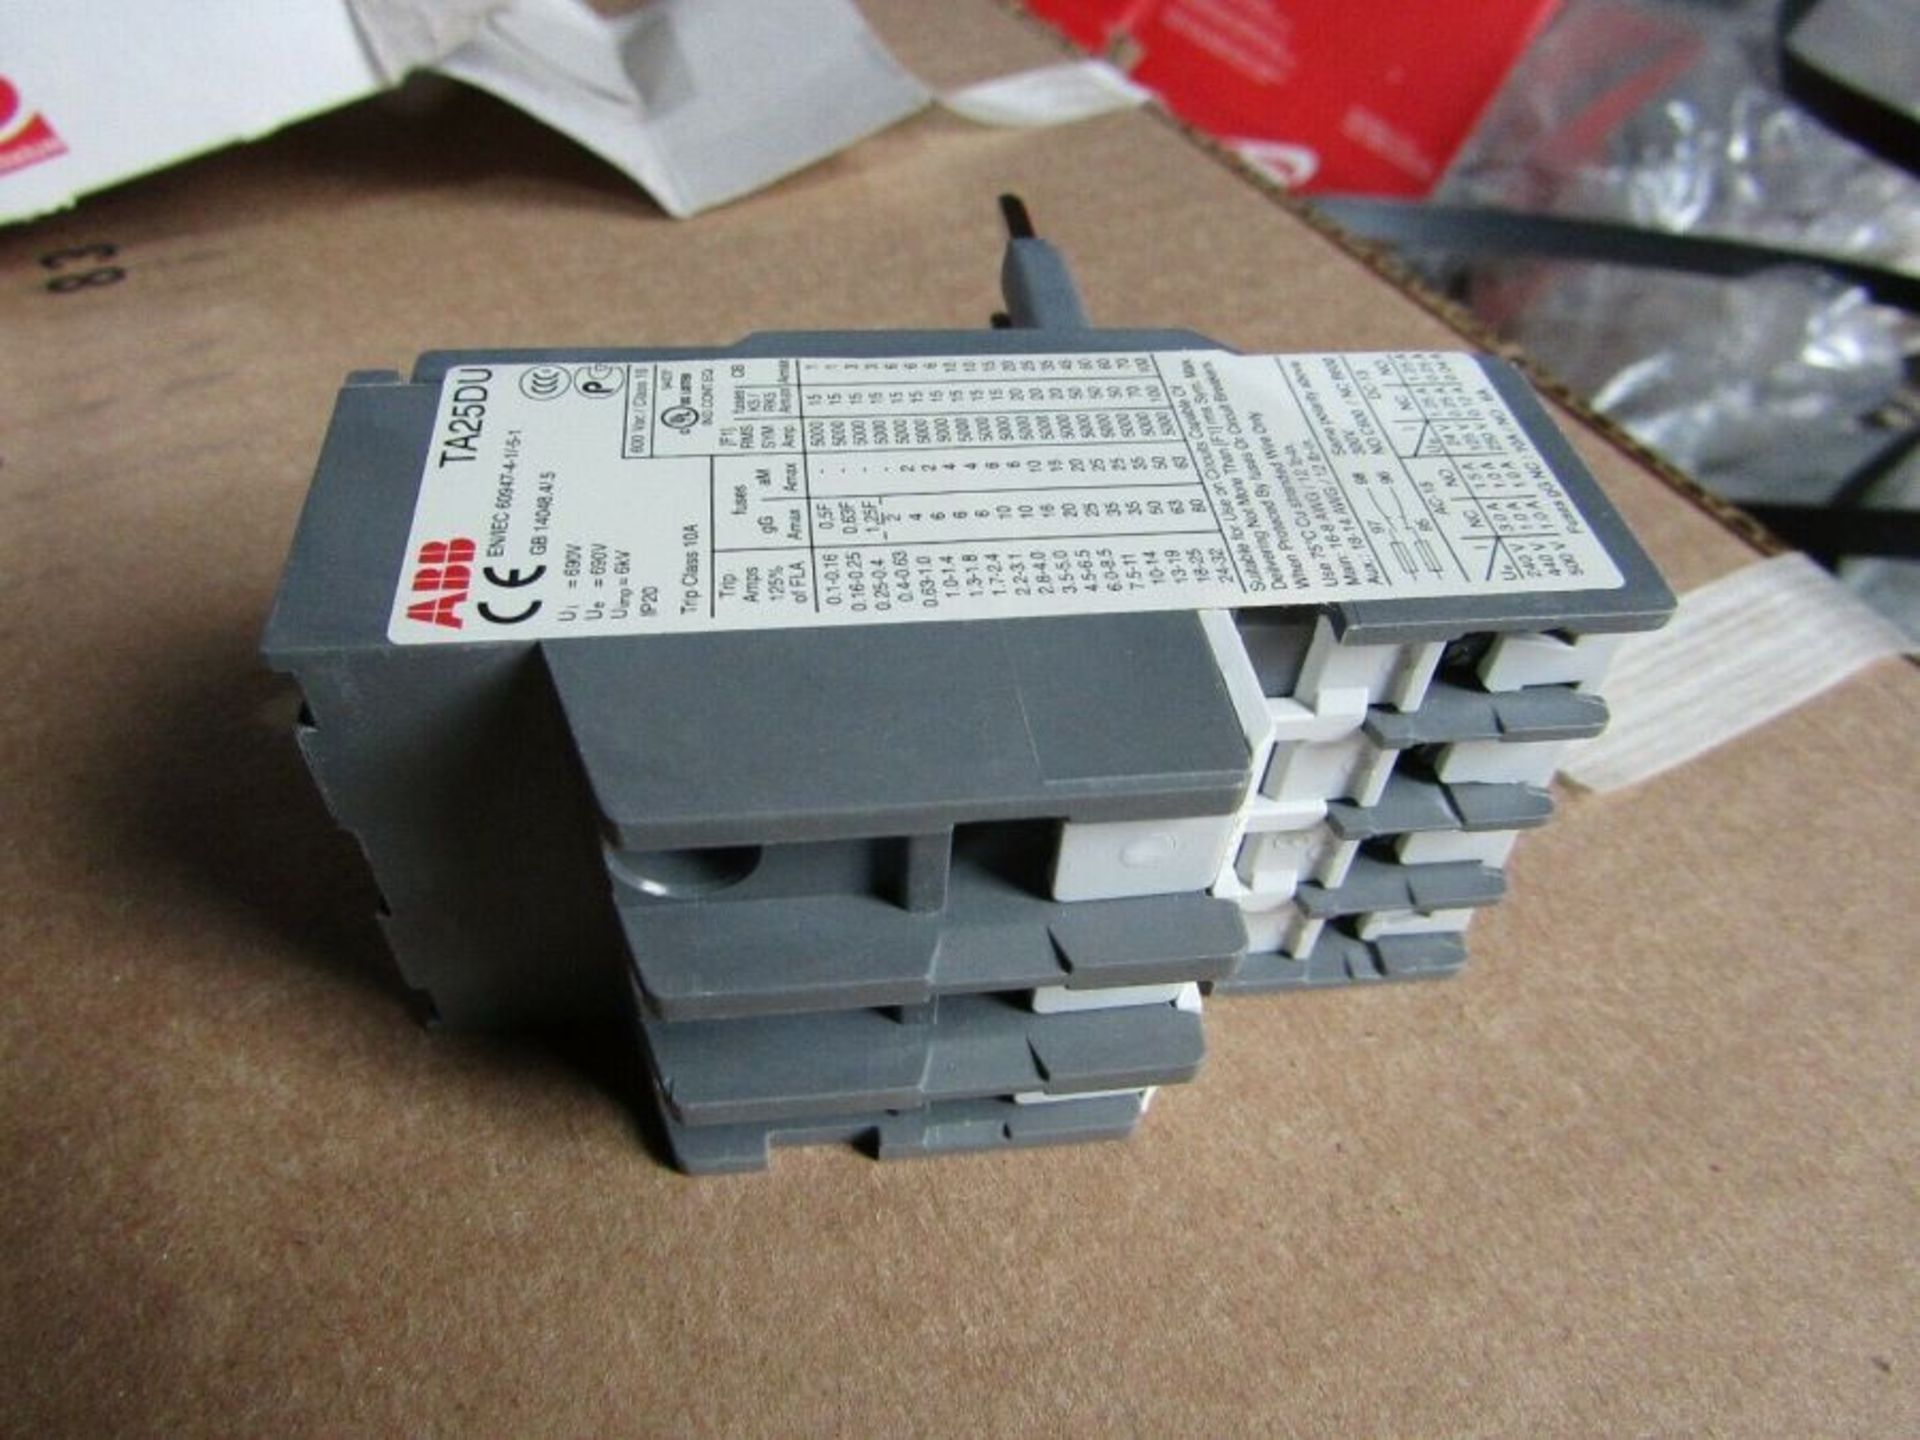 160 x ABB Thermal Overload Relays - 8 different products around 20 of each